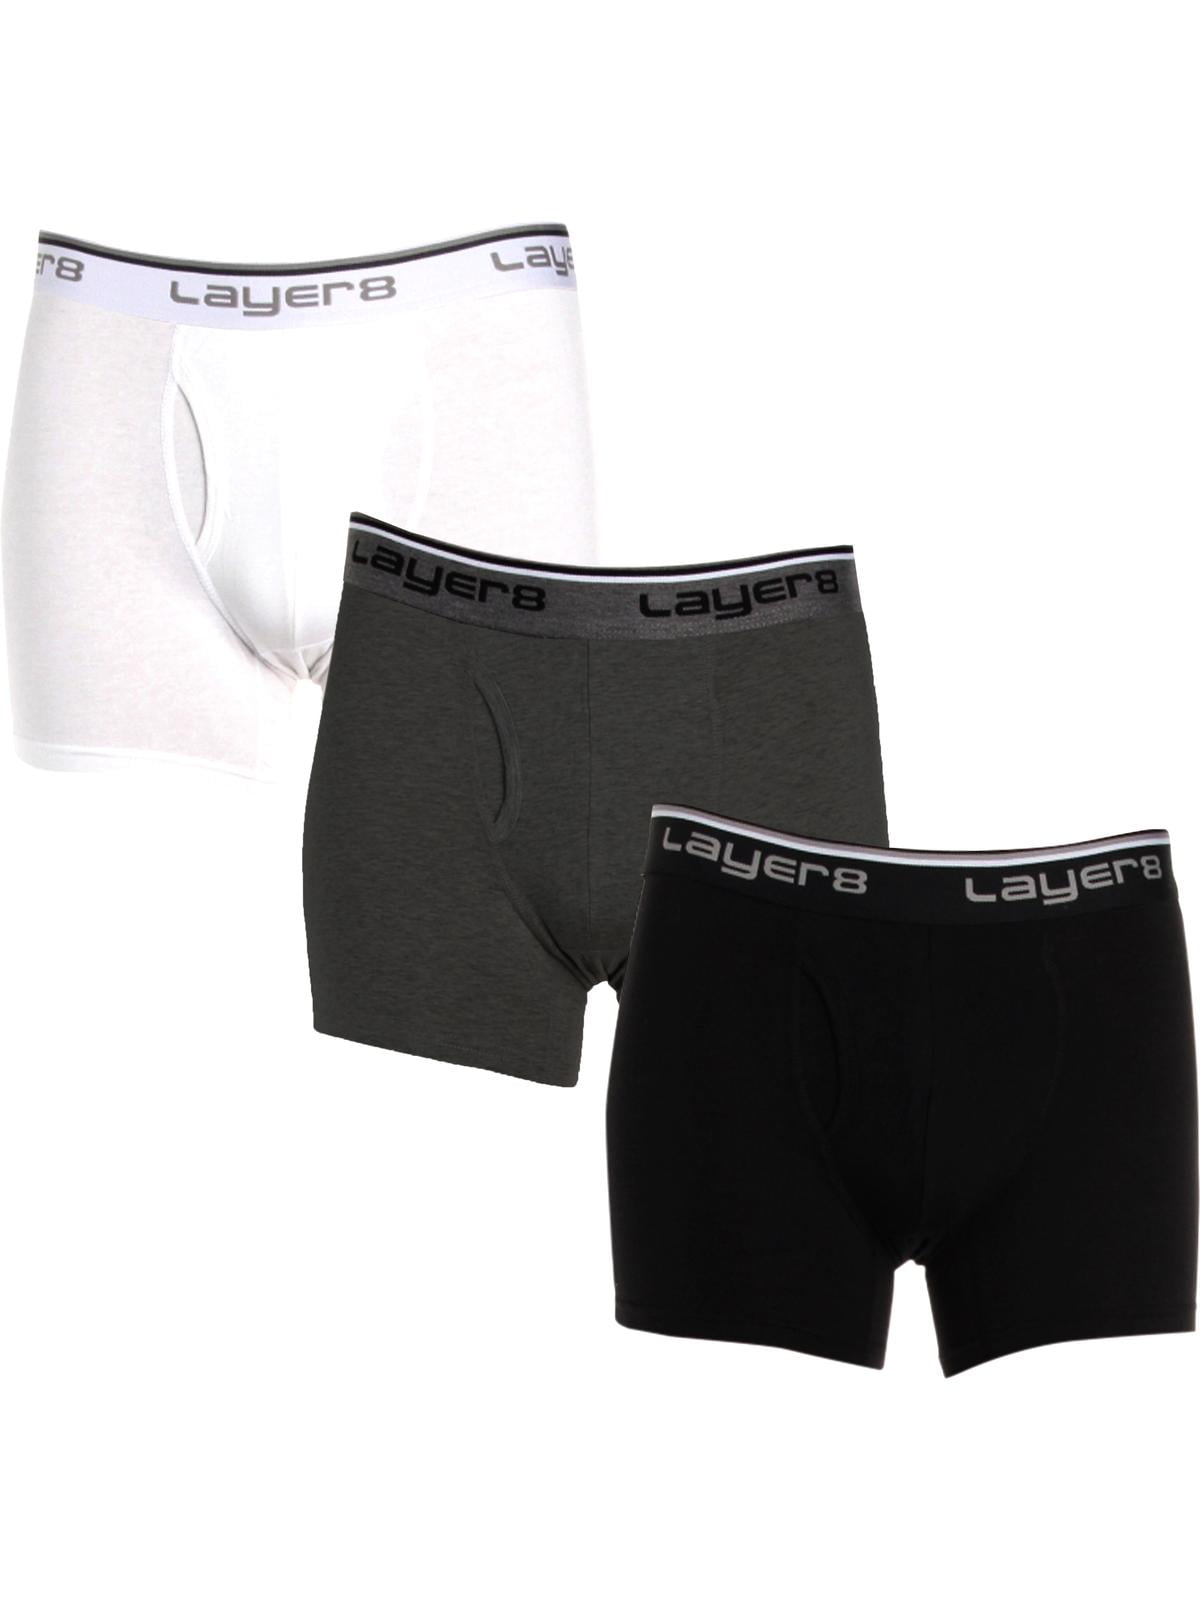 Layer 8 Mens 3 Pack Everyday Boxer Brief 